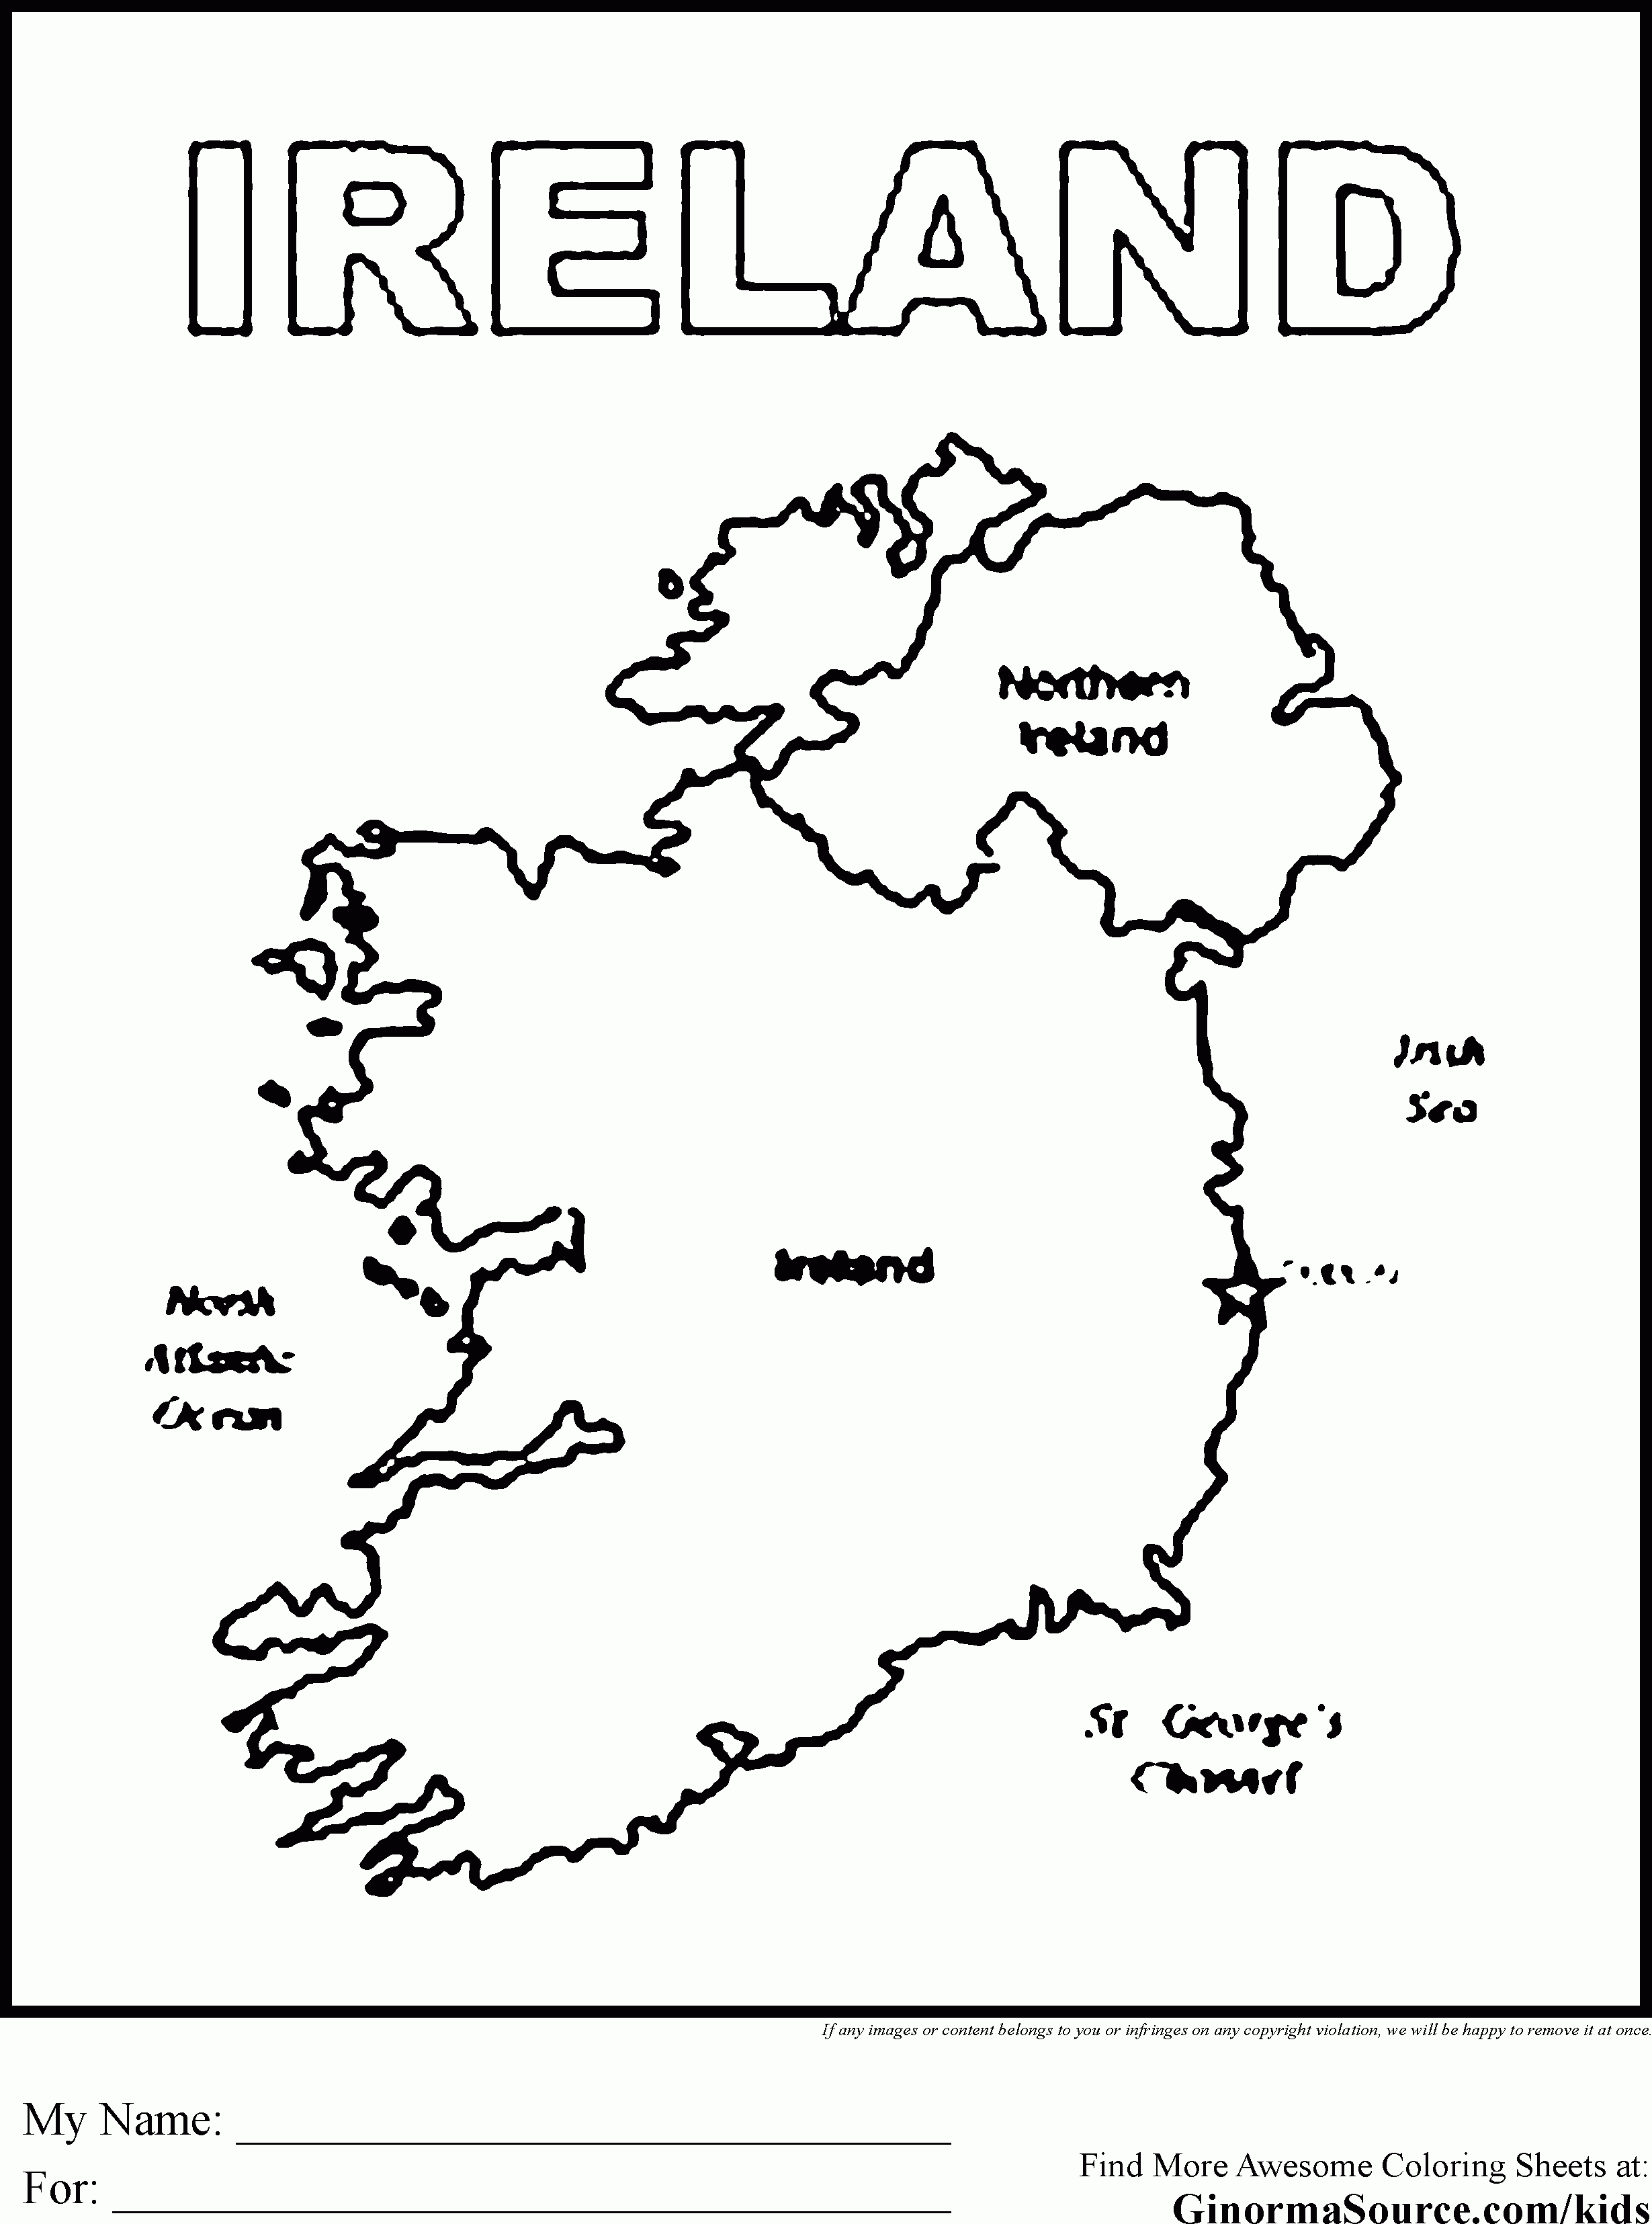 871 Simple Irish Coloring Pages for Adult